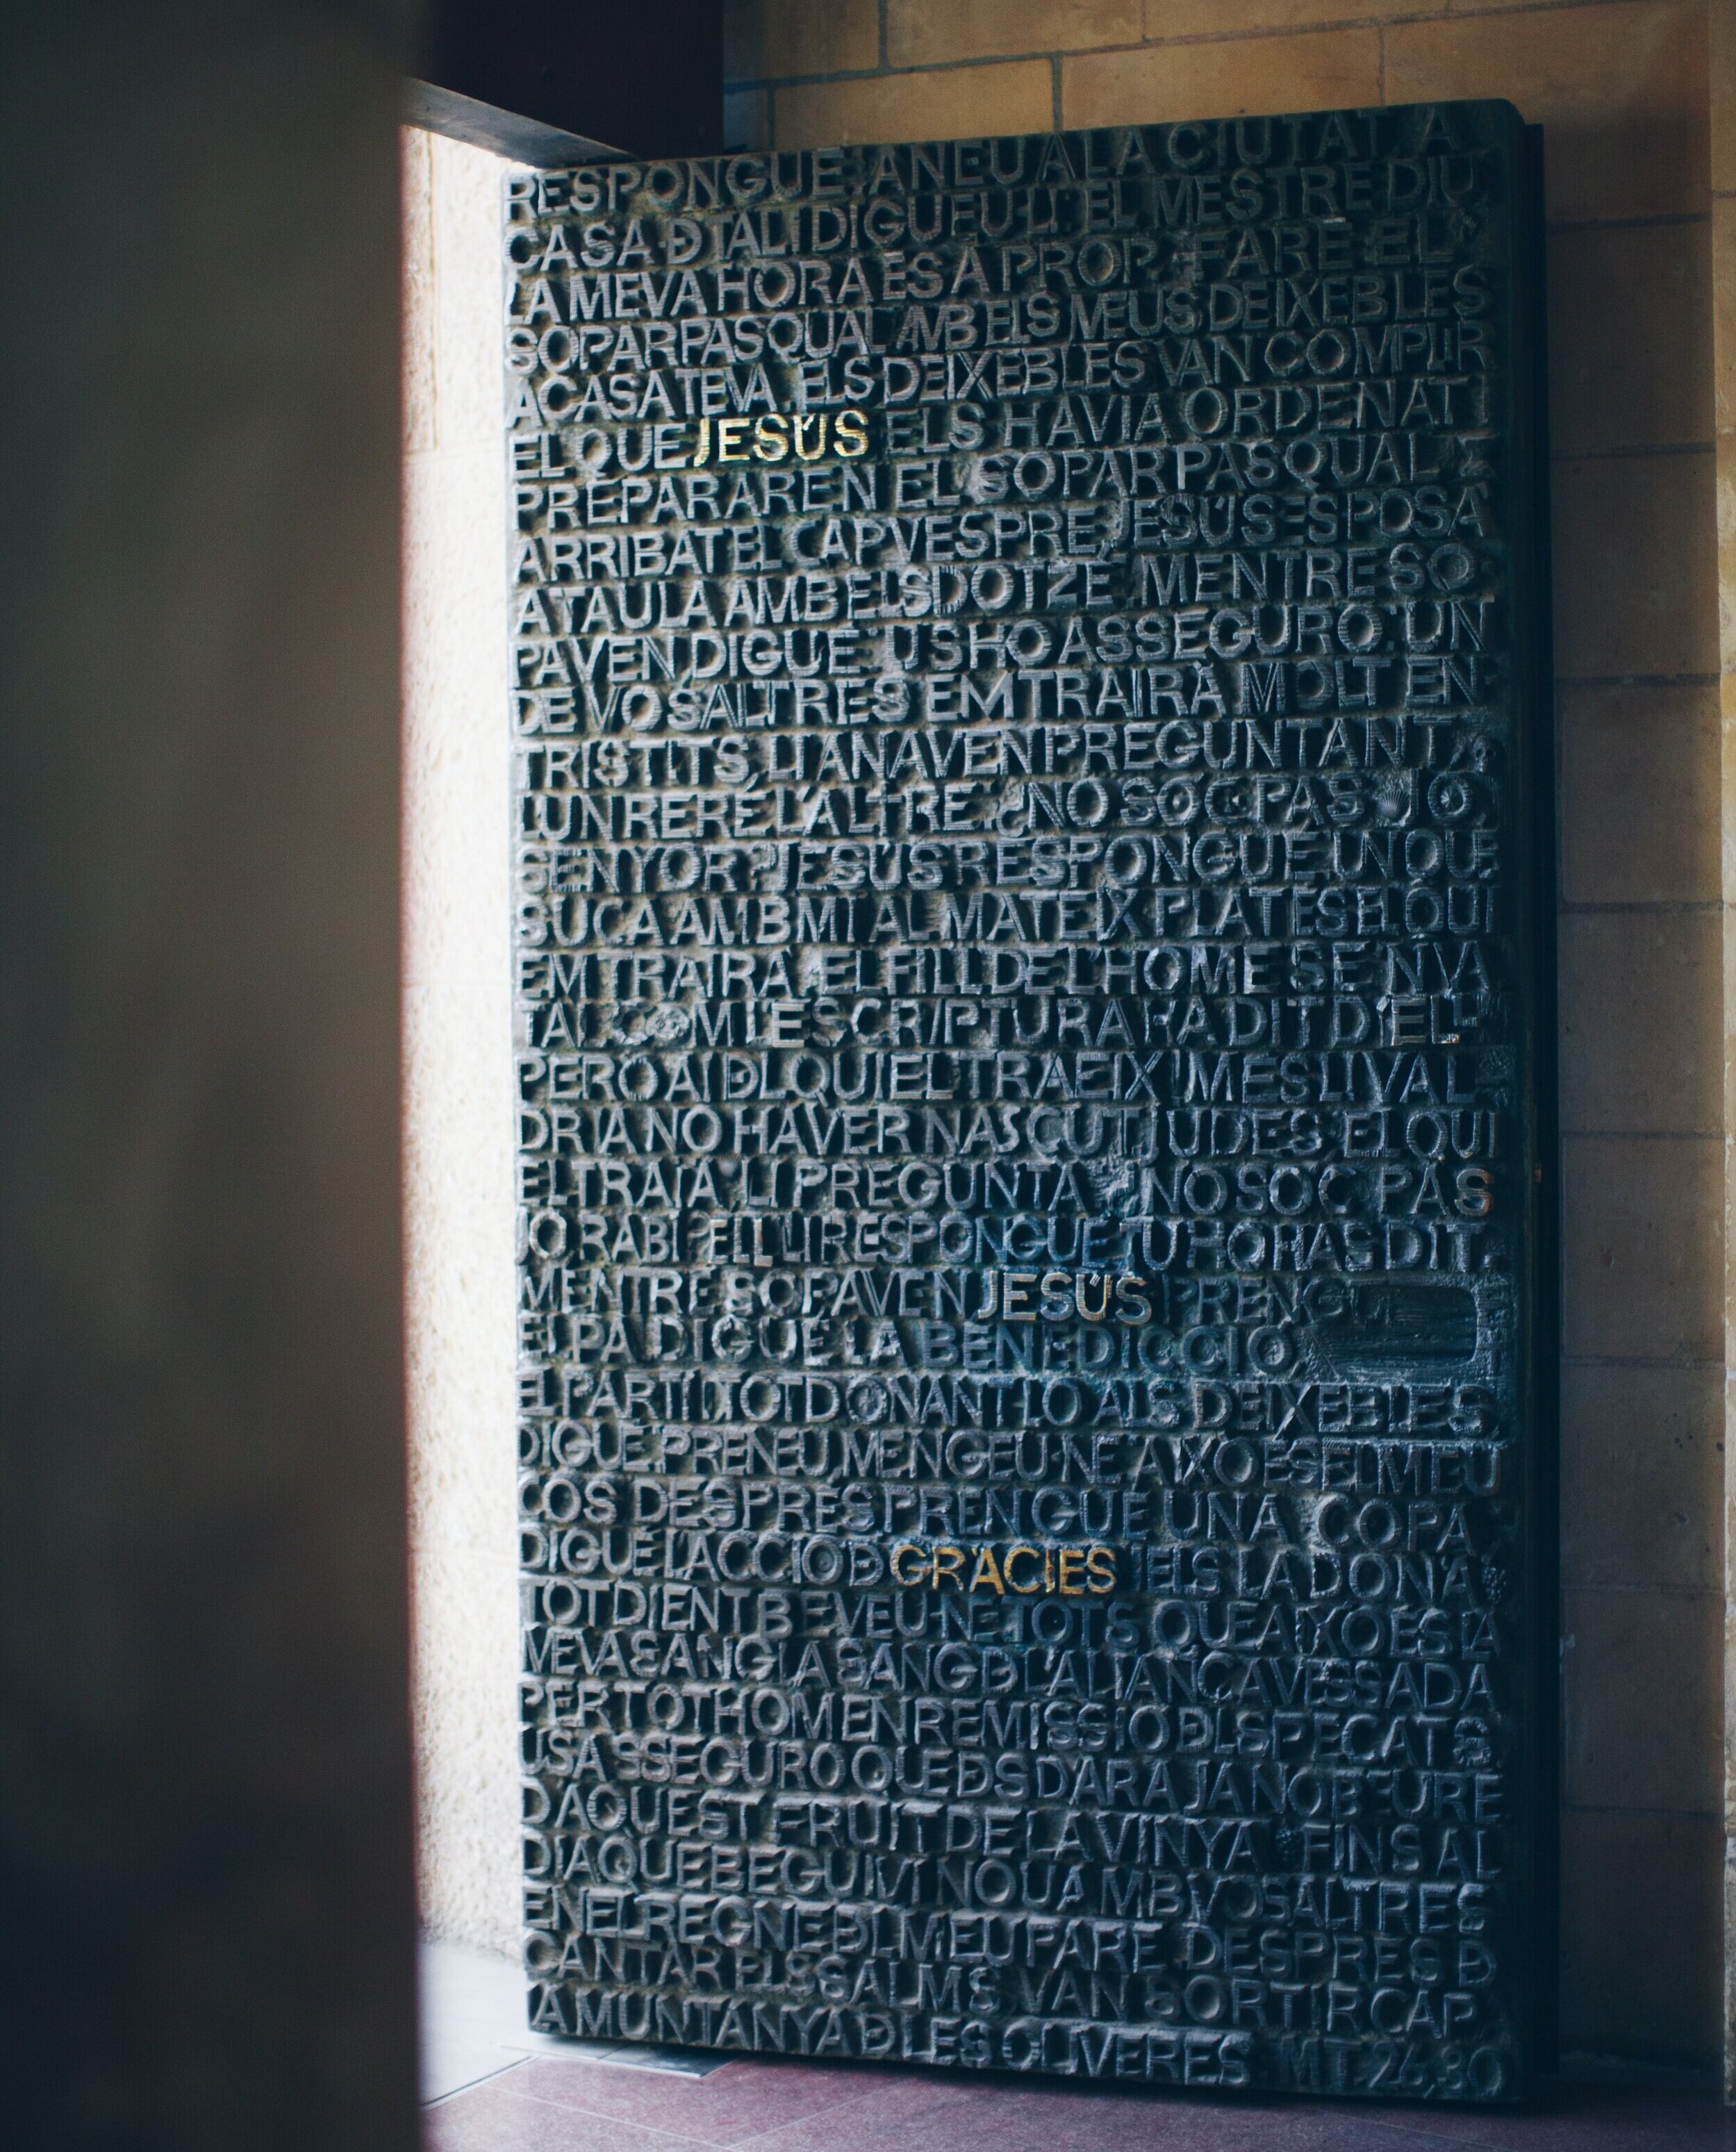 A door in Catalan at the Sagrada Familia in Barcelona, one of the most famous cathedrals in Spain. Photo by Jenny Marvin on Unsplash